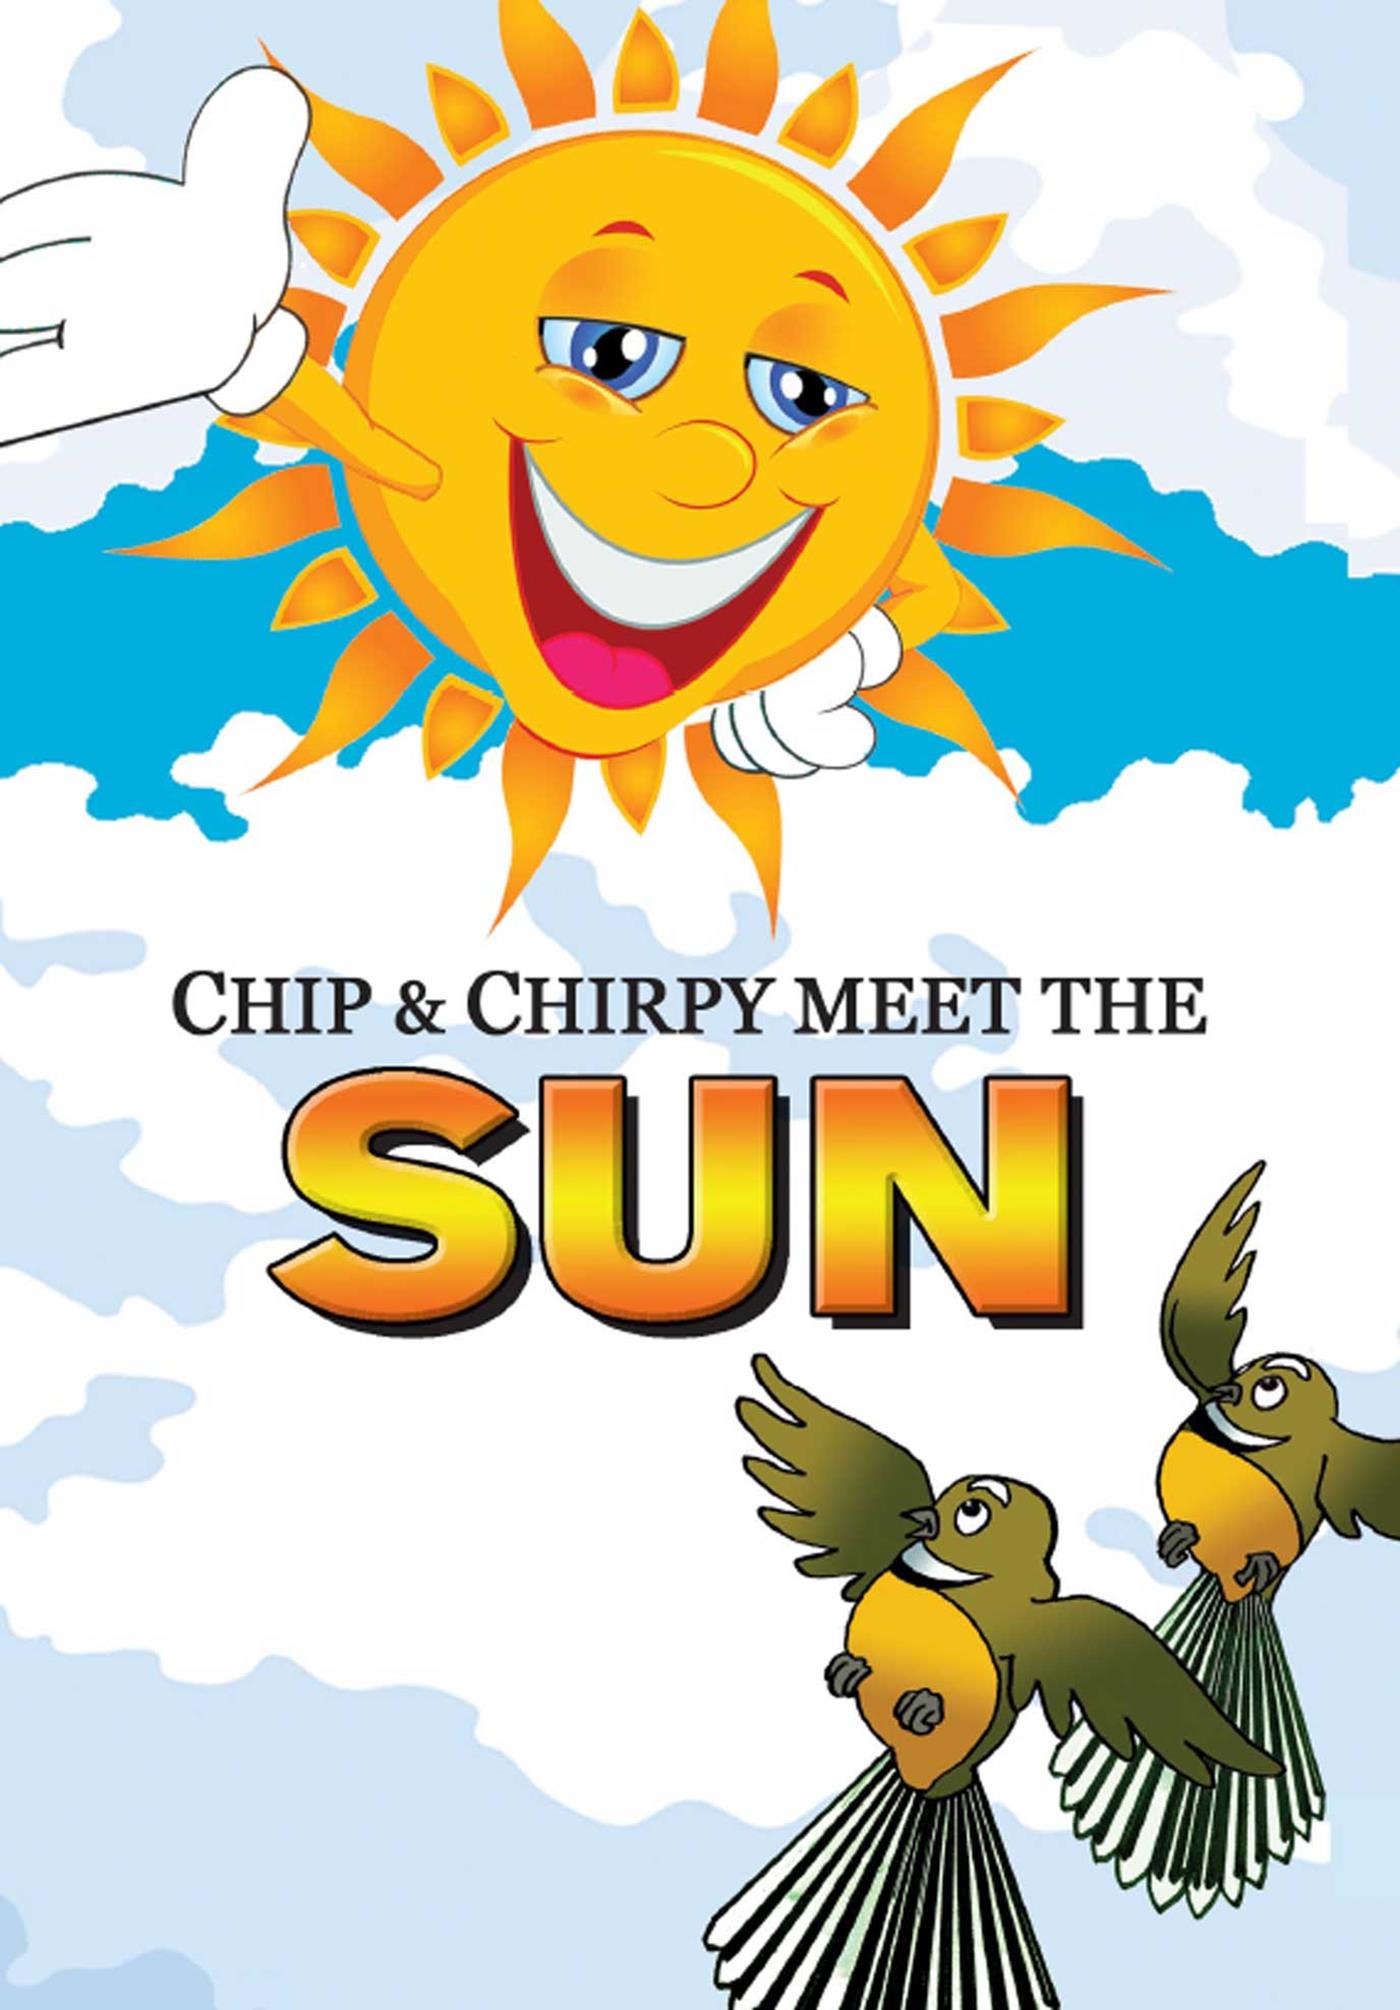 Chip & Chirpy Meet the Sun ebook cover image